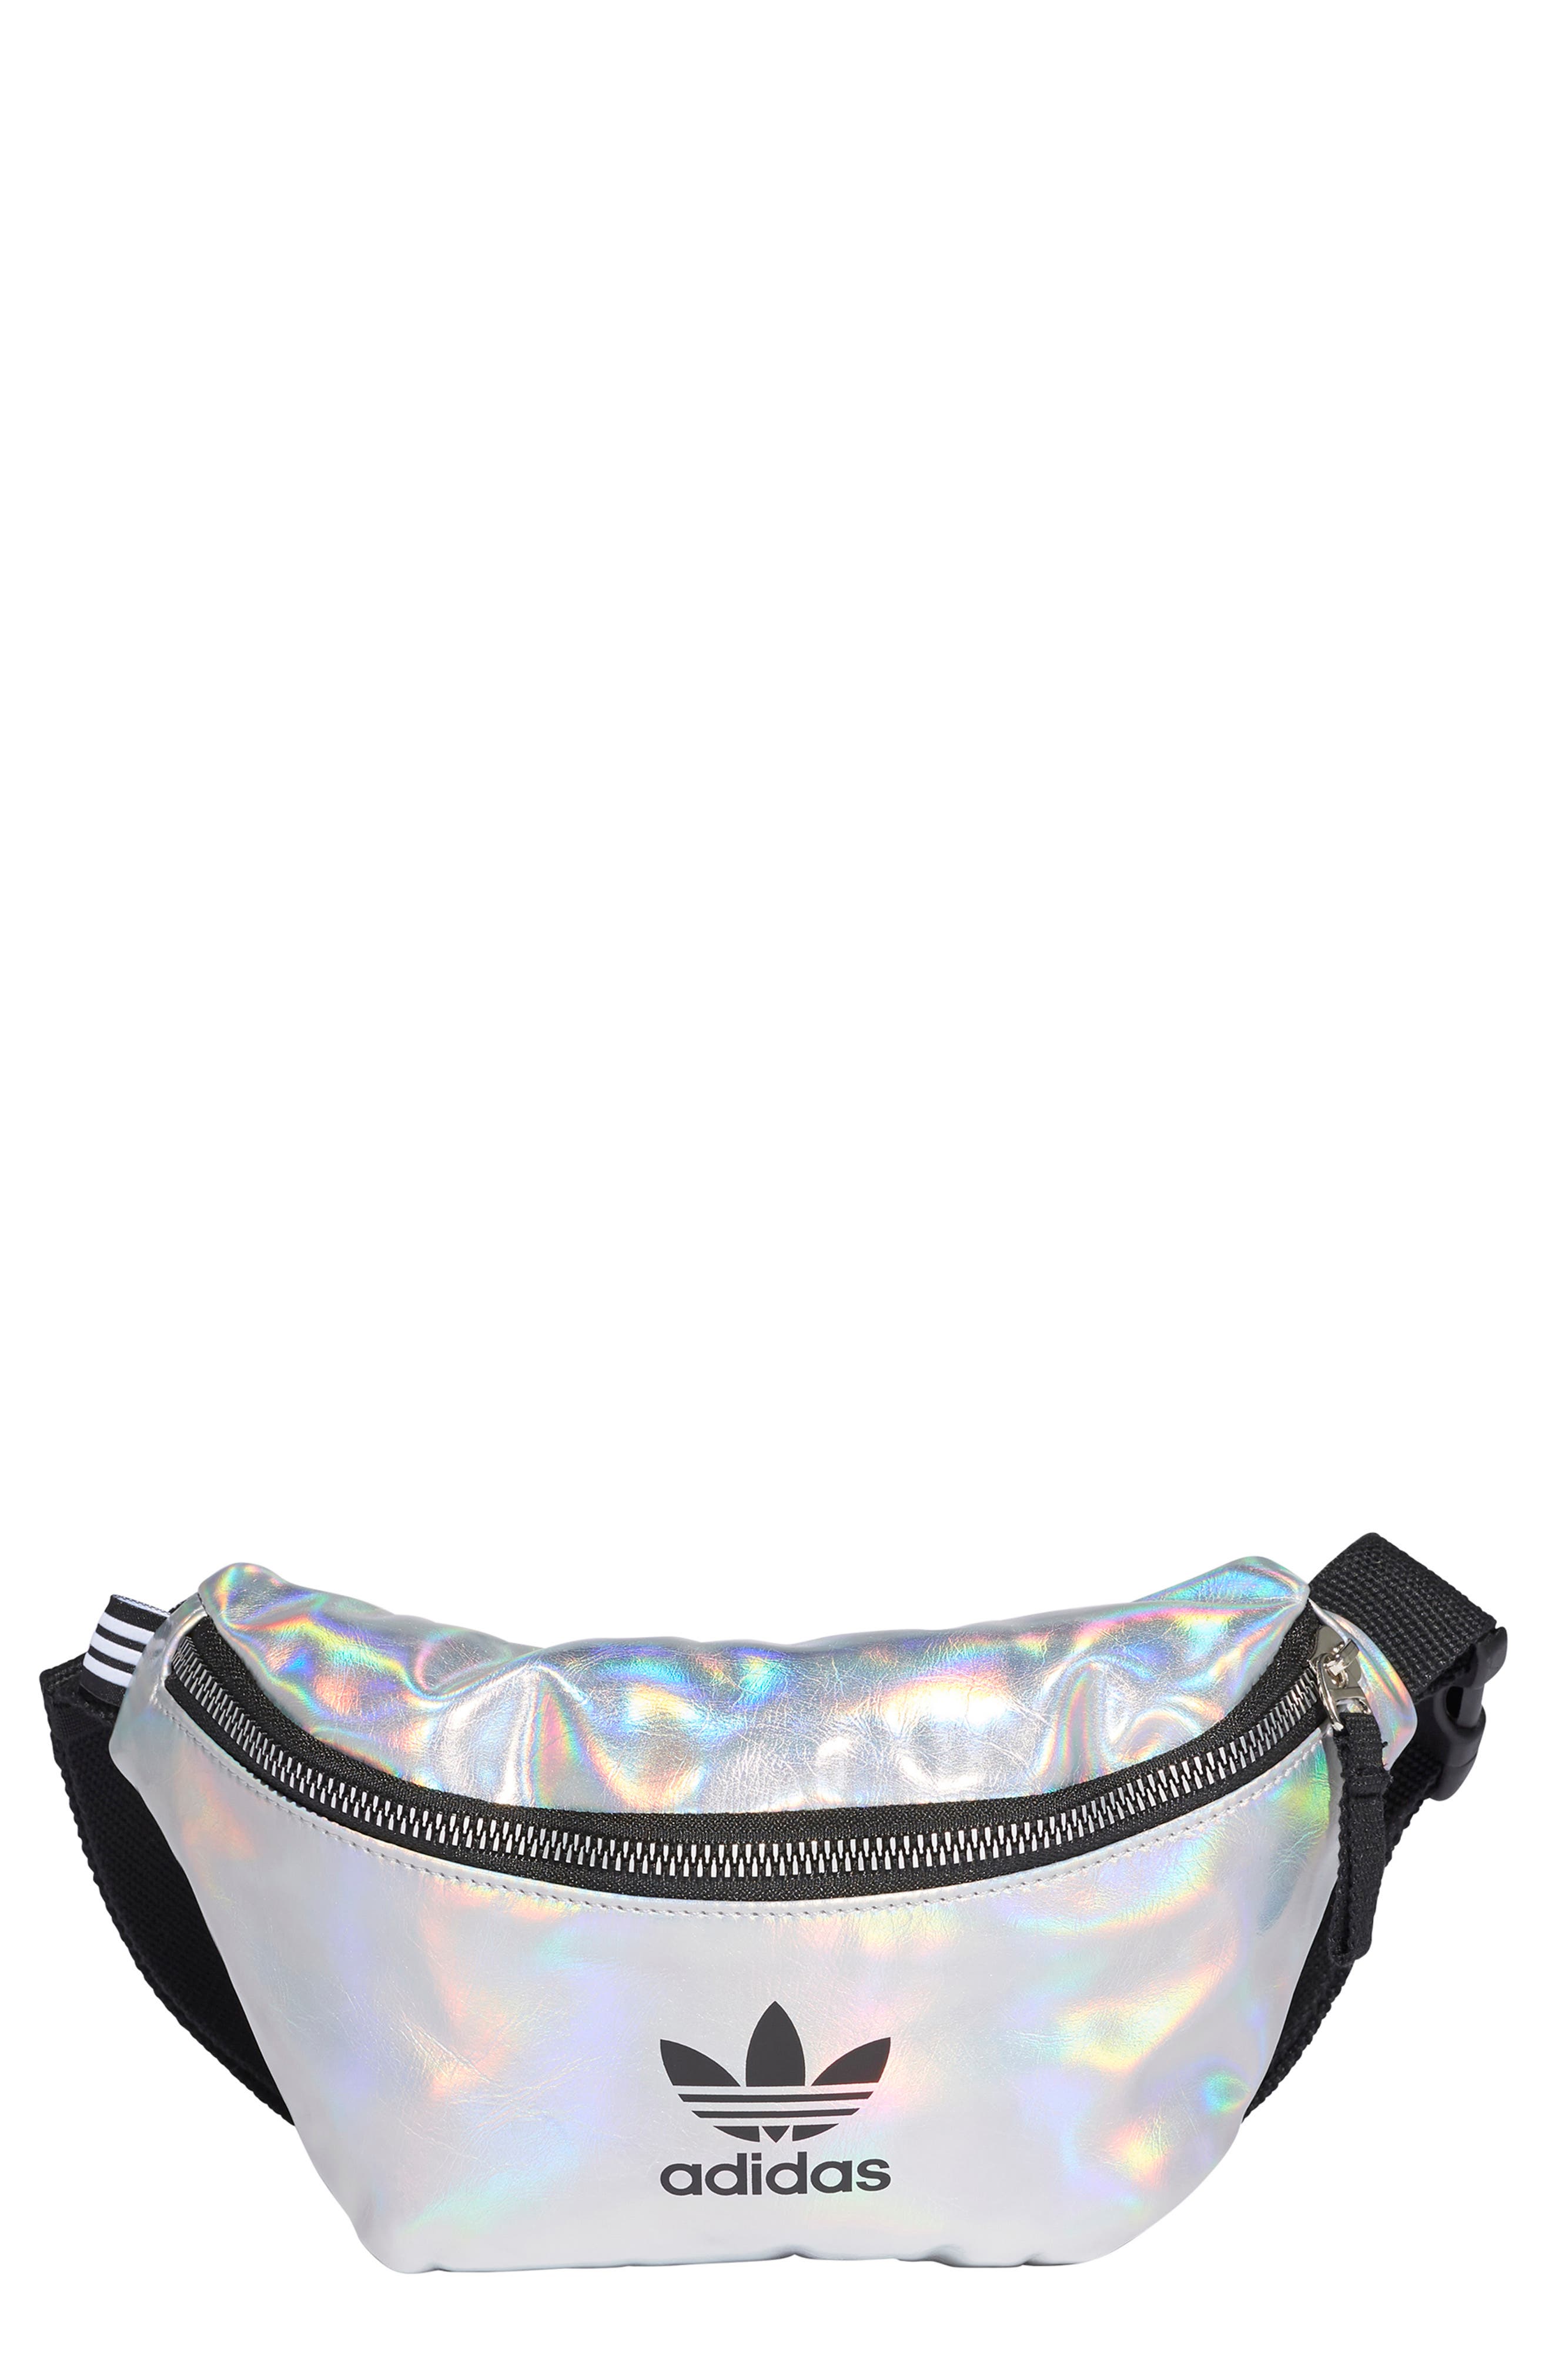 holographic adidas fanny pack